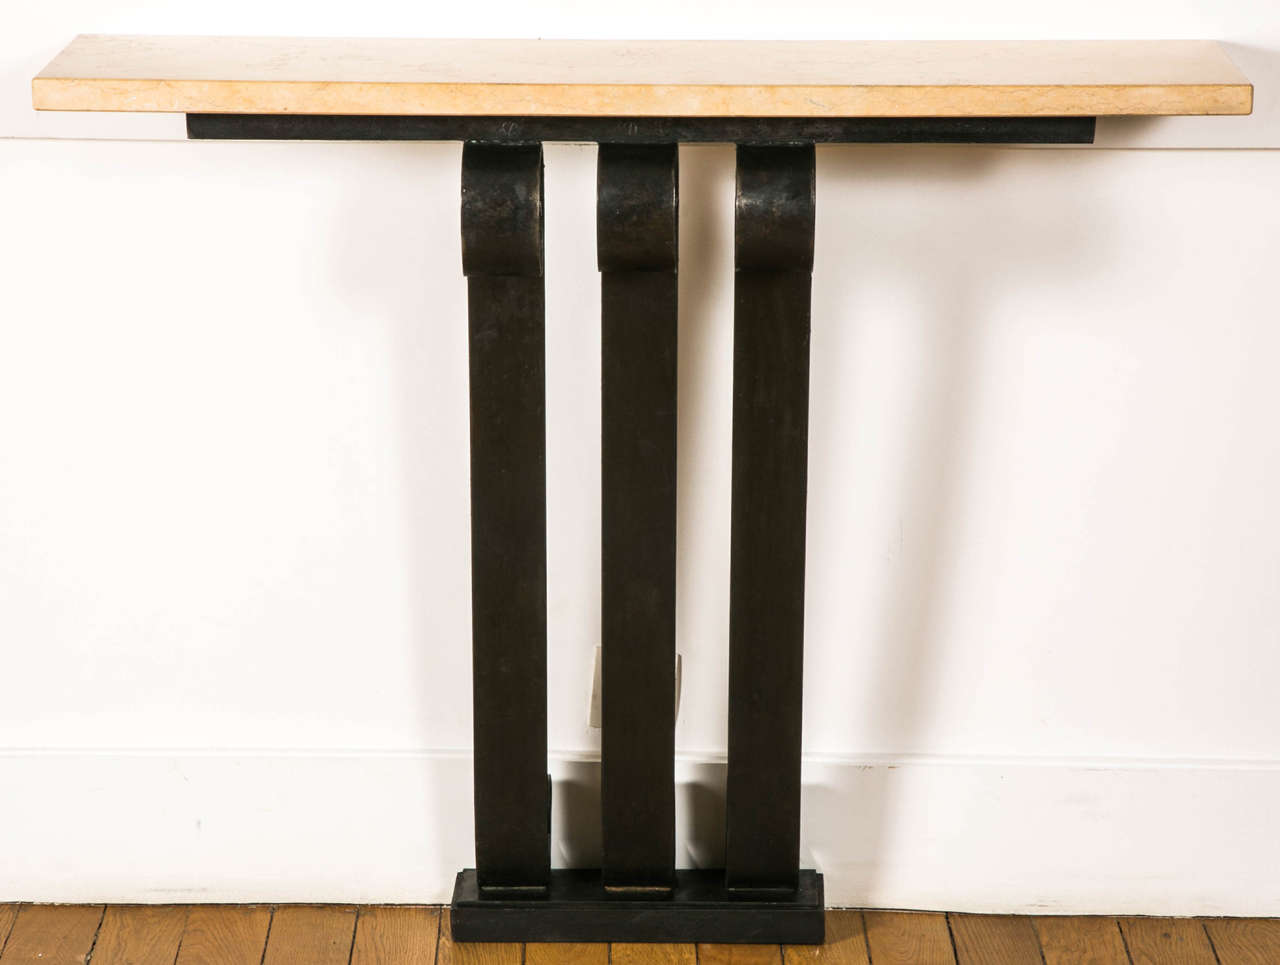 Wrought iron Art Deco console with a rectangular beige marble top, France, 1930s.
Three-part base with double volutes.